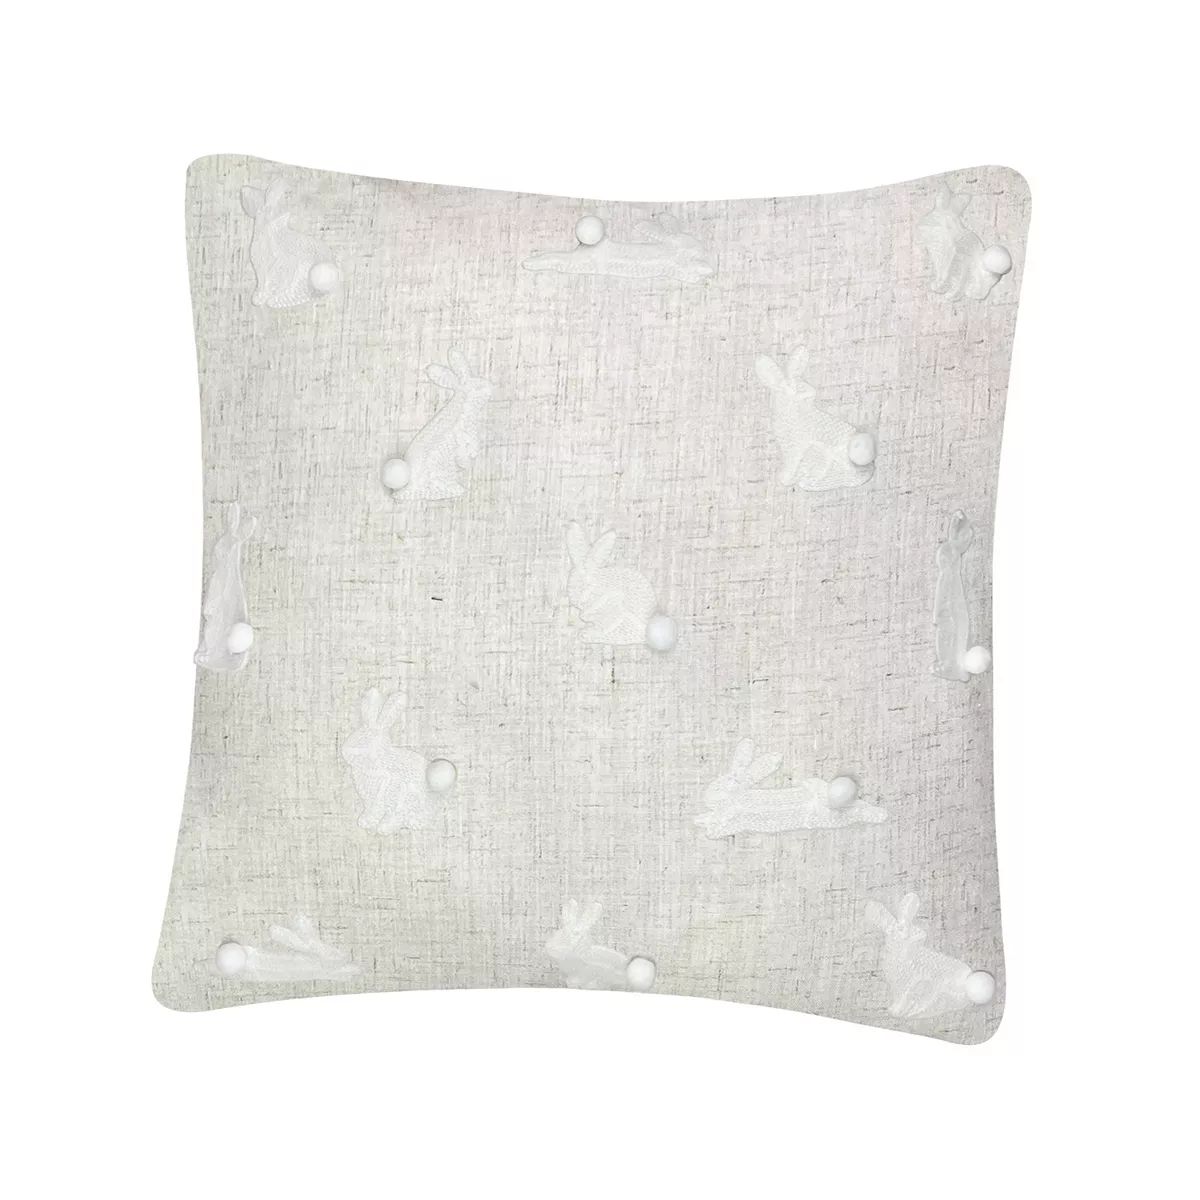 Celebrate Together™ Easter Embellished Ditsy Bunnies Throw Pillow | Kohl's